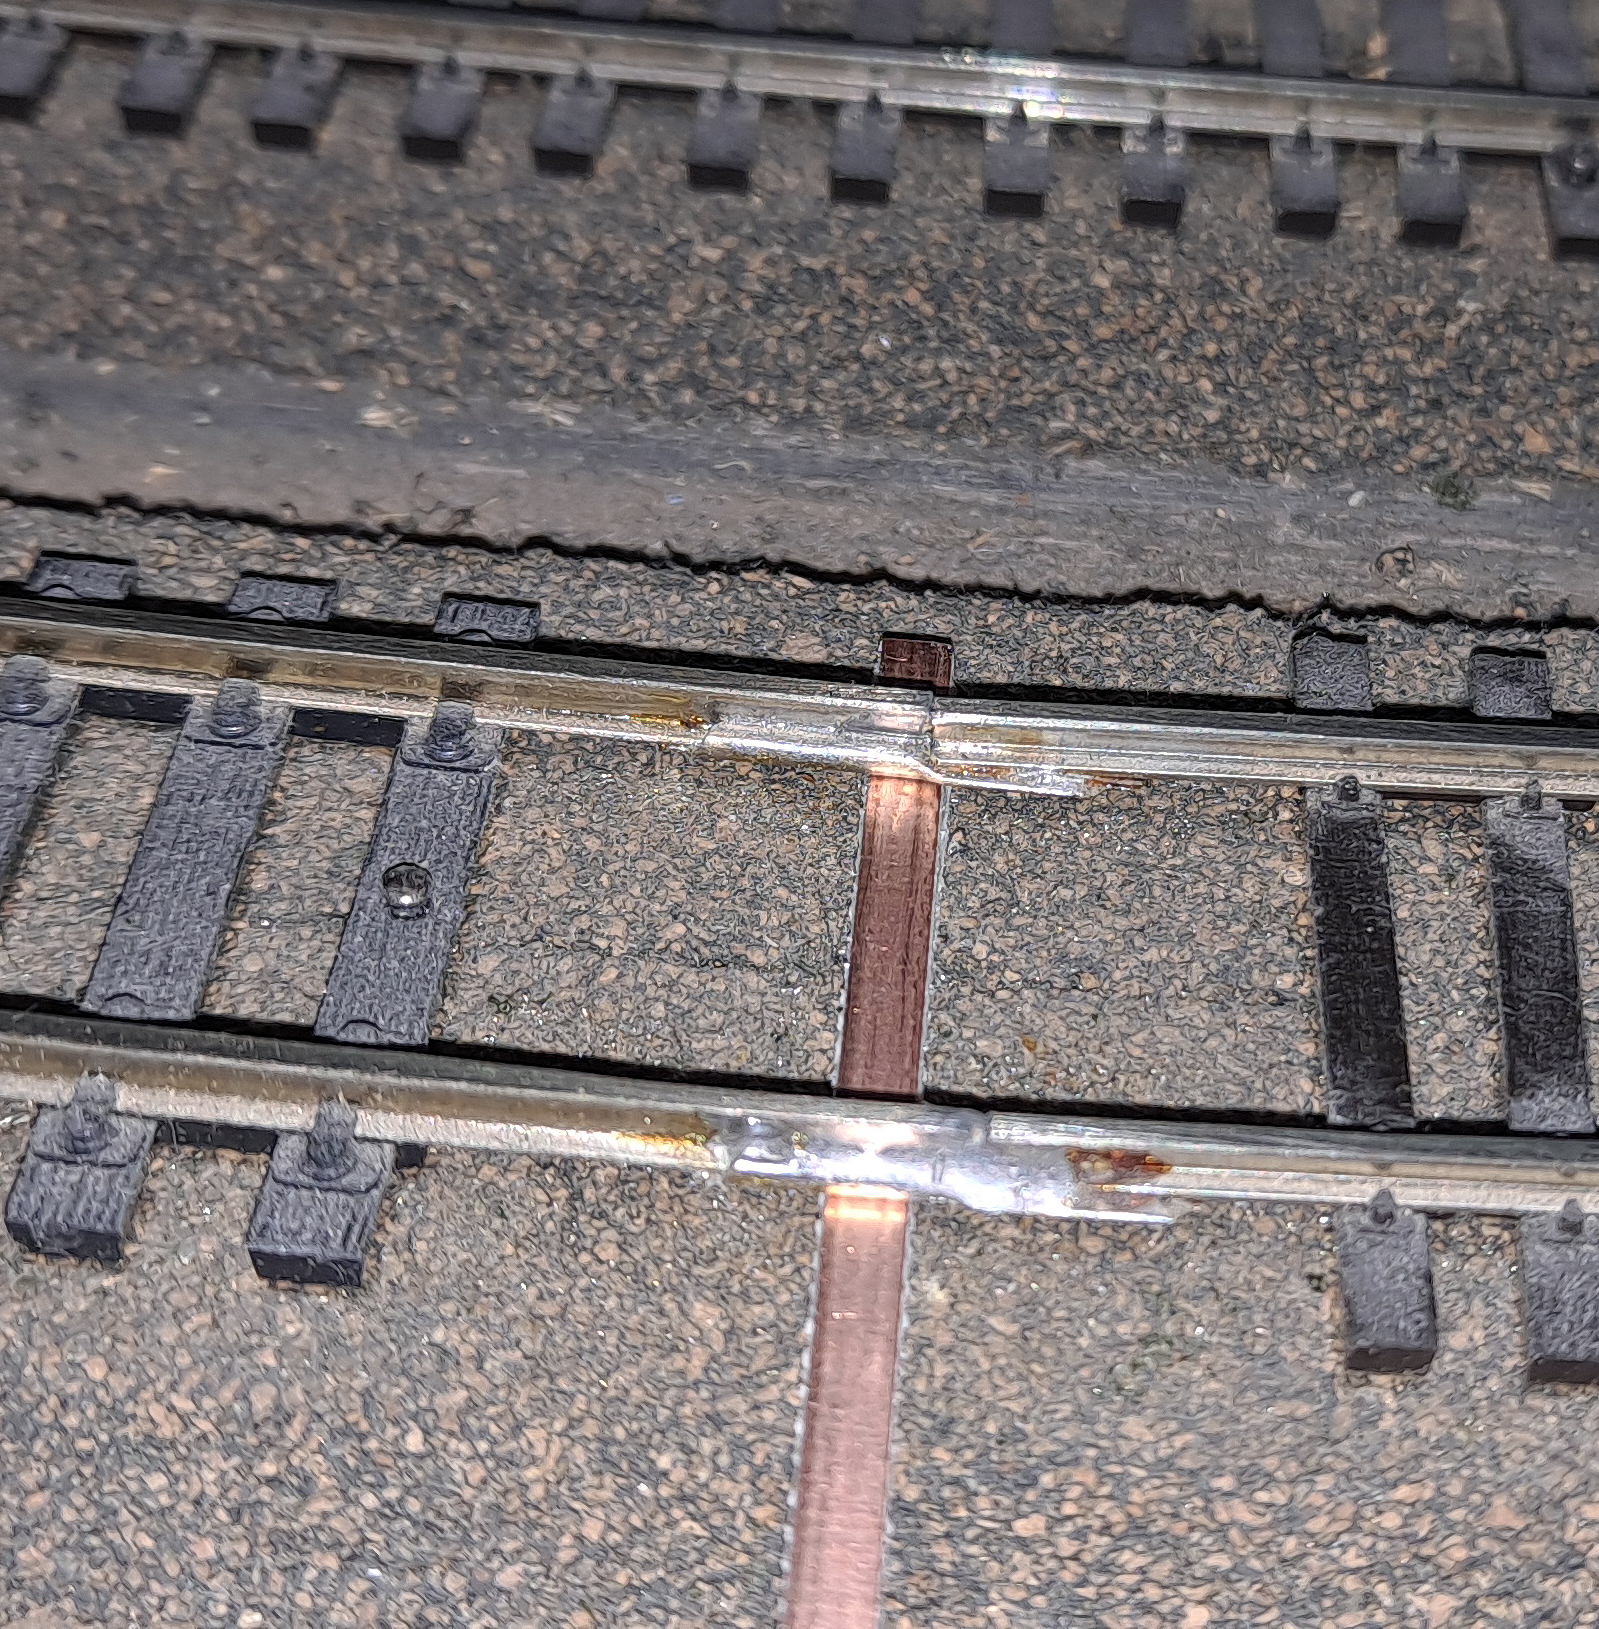 A piece of printed-circuit board tie is placed under the track.